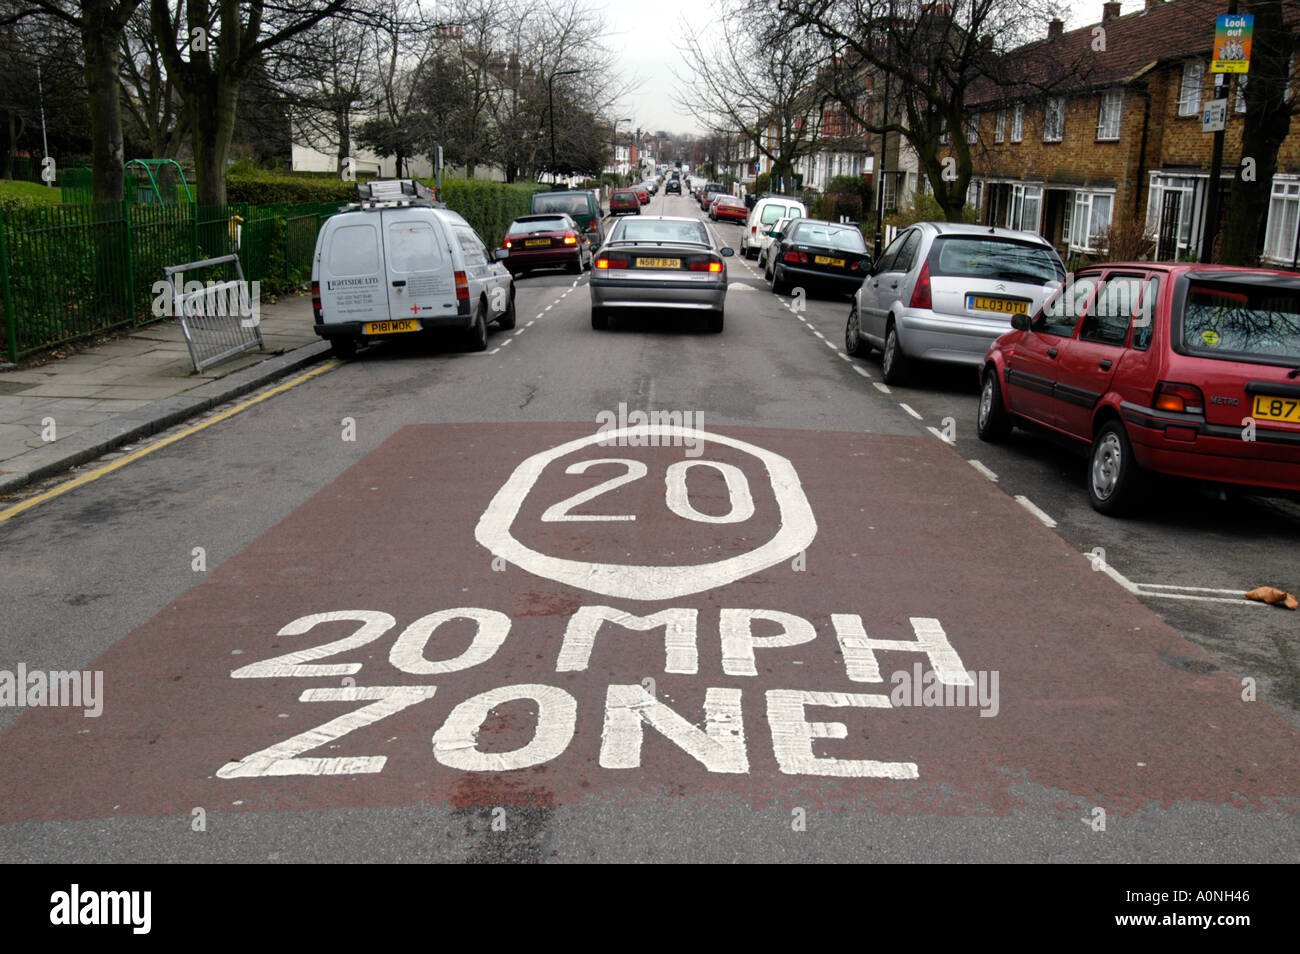 20 mph speed restricted zone in residential street, Haringey, London, England, UK Stock Photo